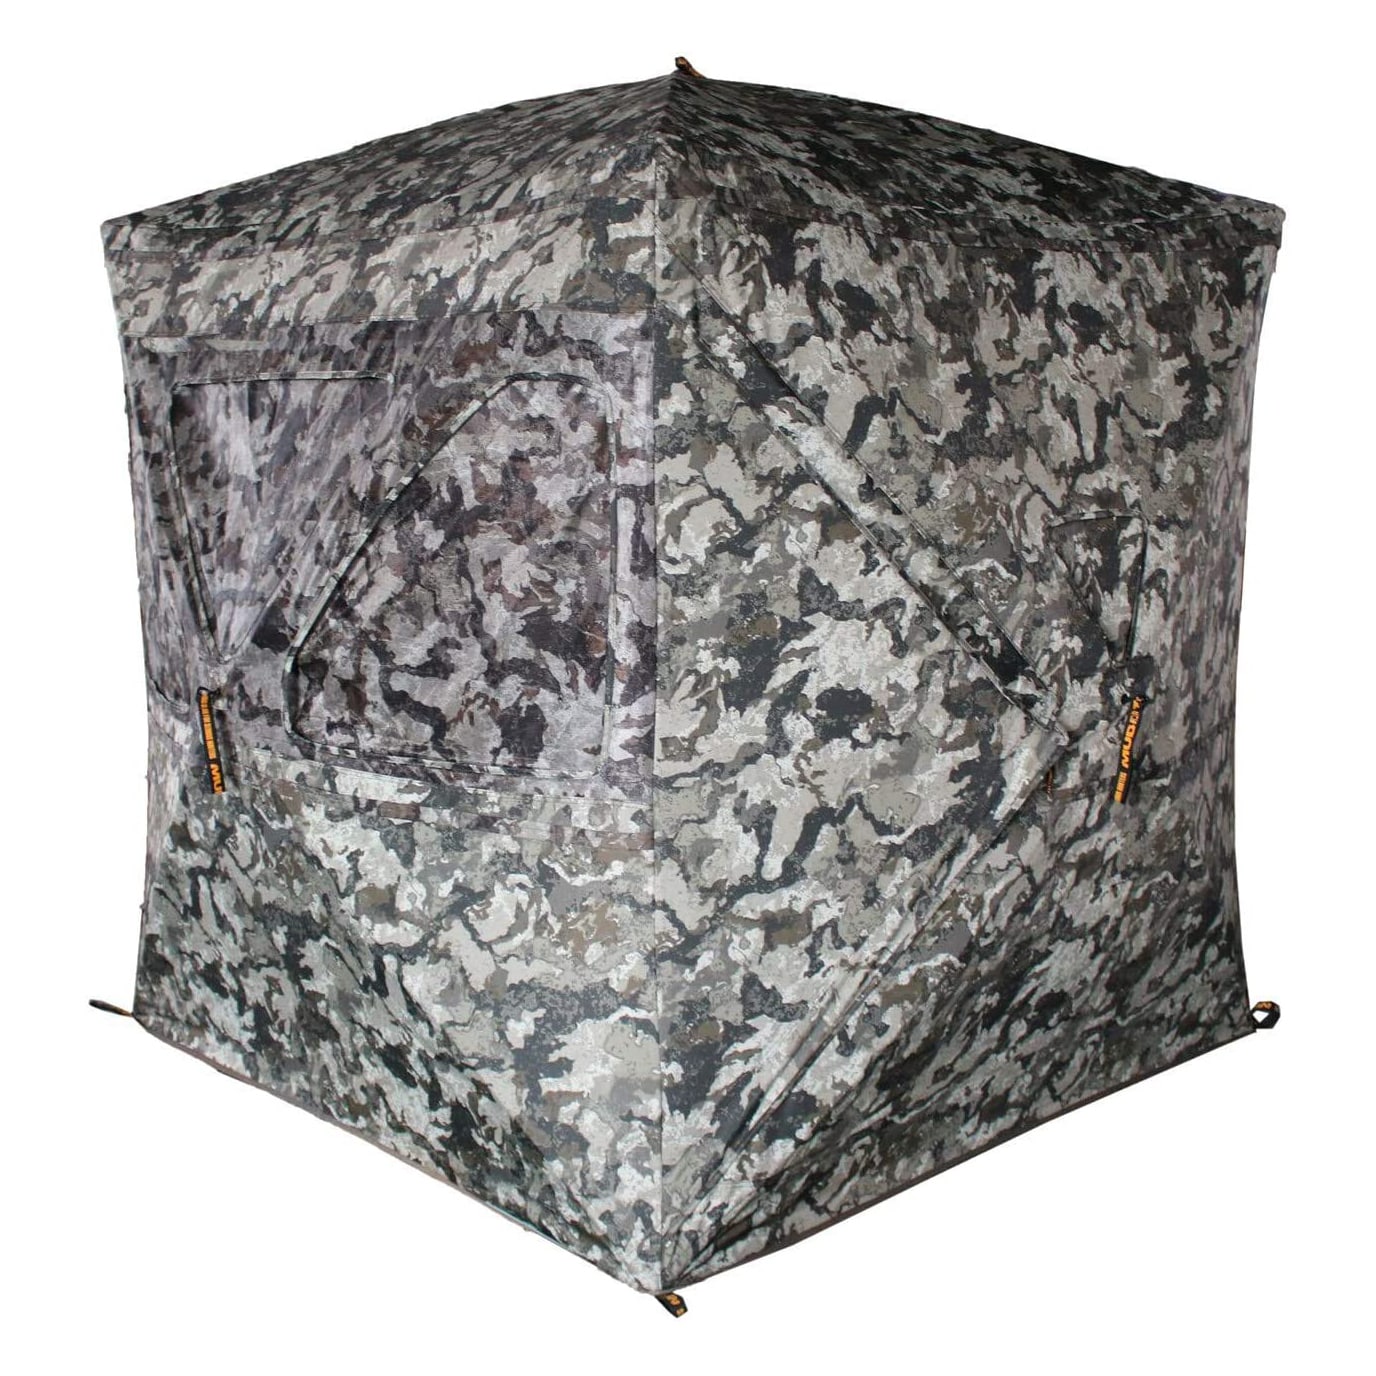 Best Ground Blinds for Bow Hunting in 2022 Reviews